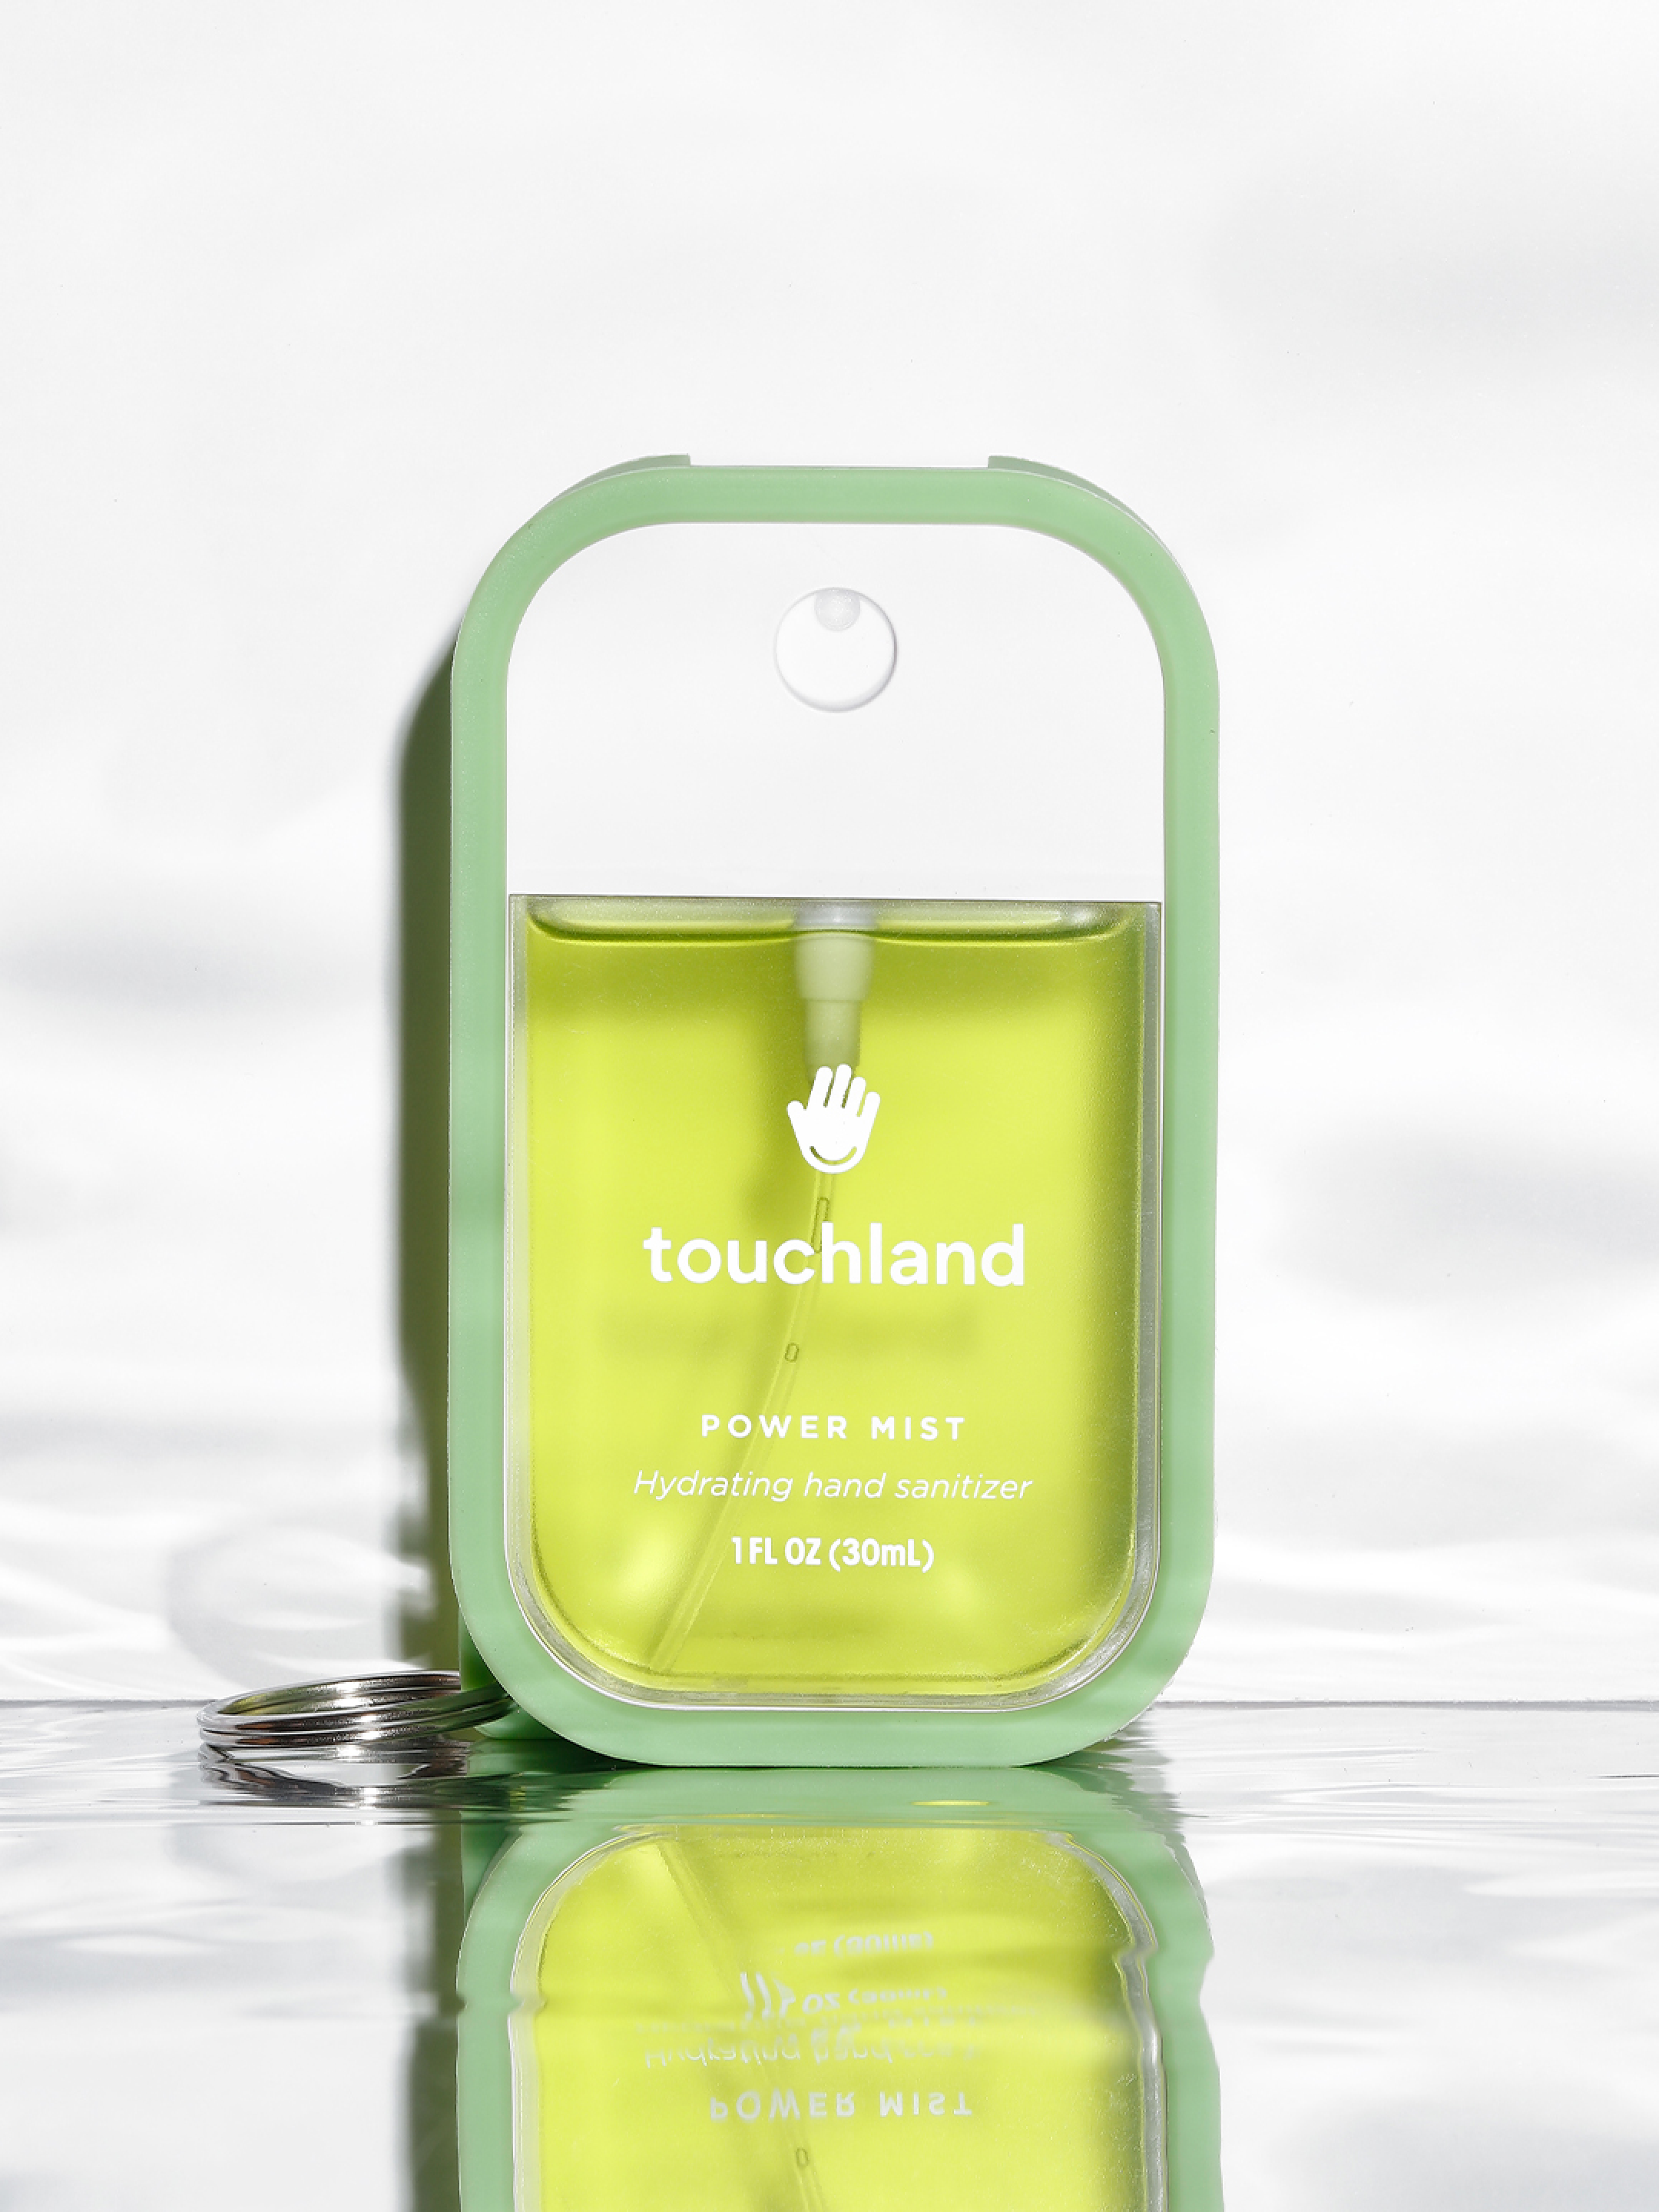 Touchland mist case green in white packaging on white background